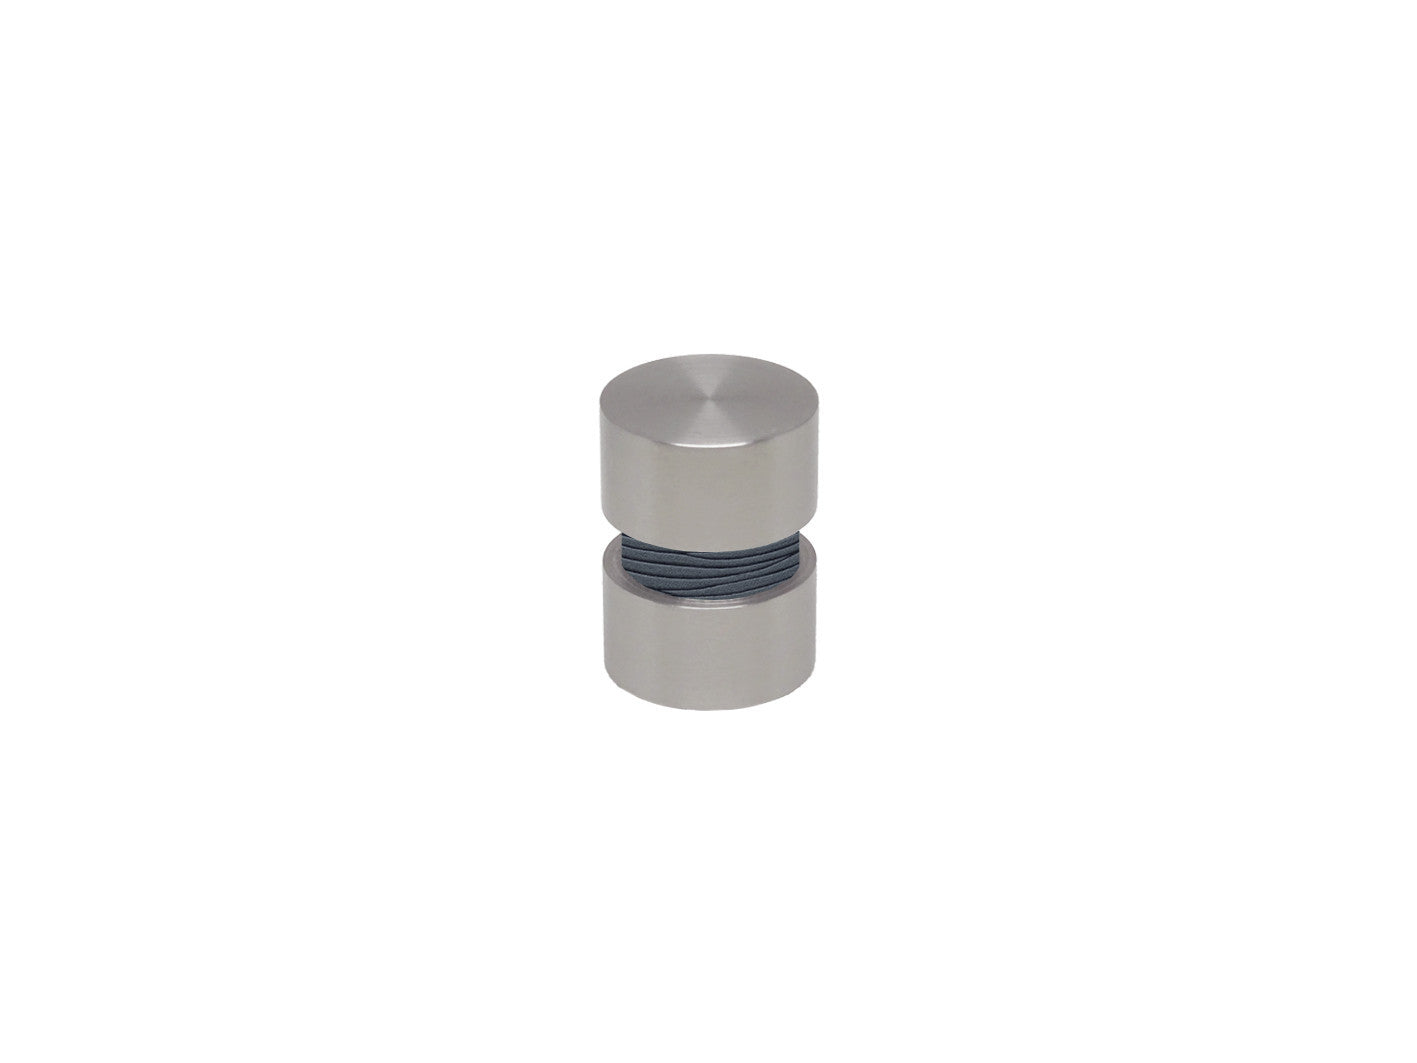 Flint blue curtain pole finial in stainless steel for 19mm curtain pole